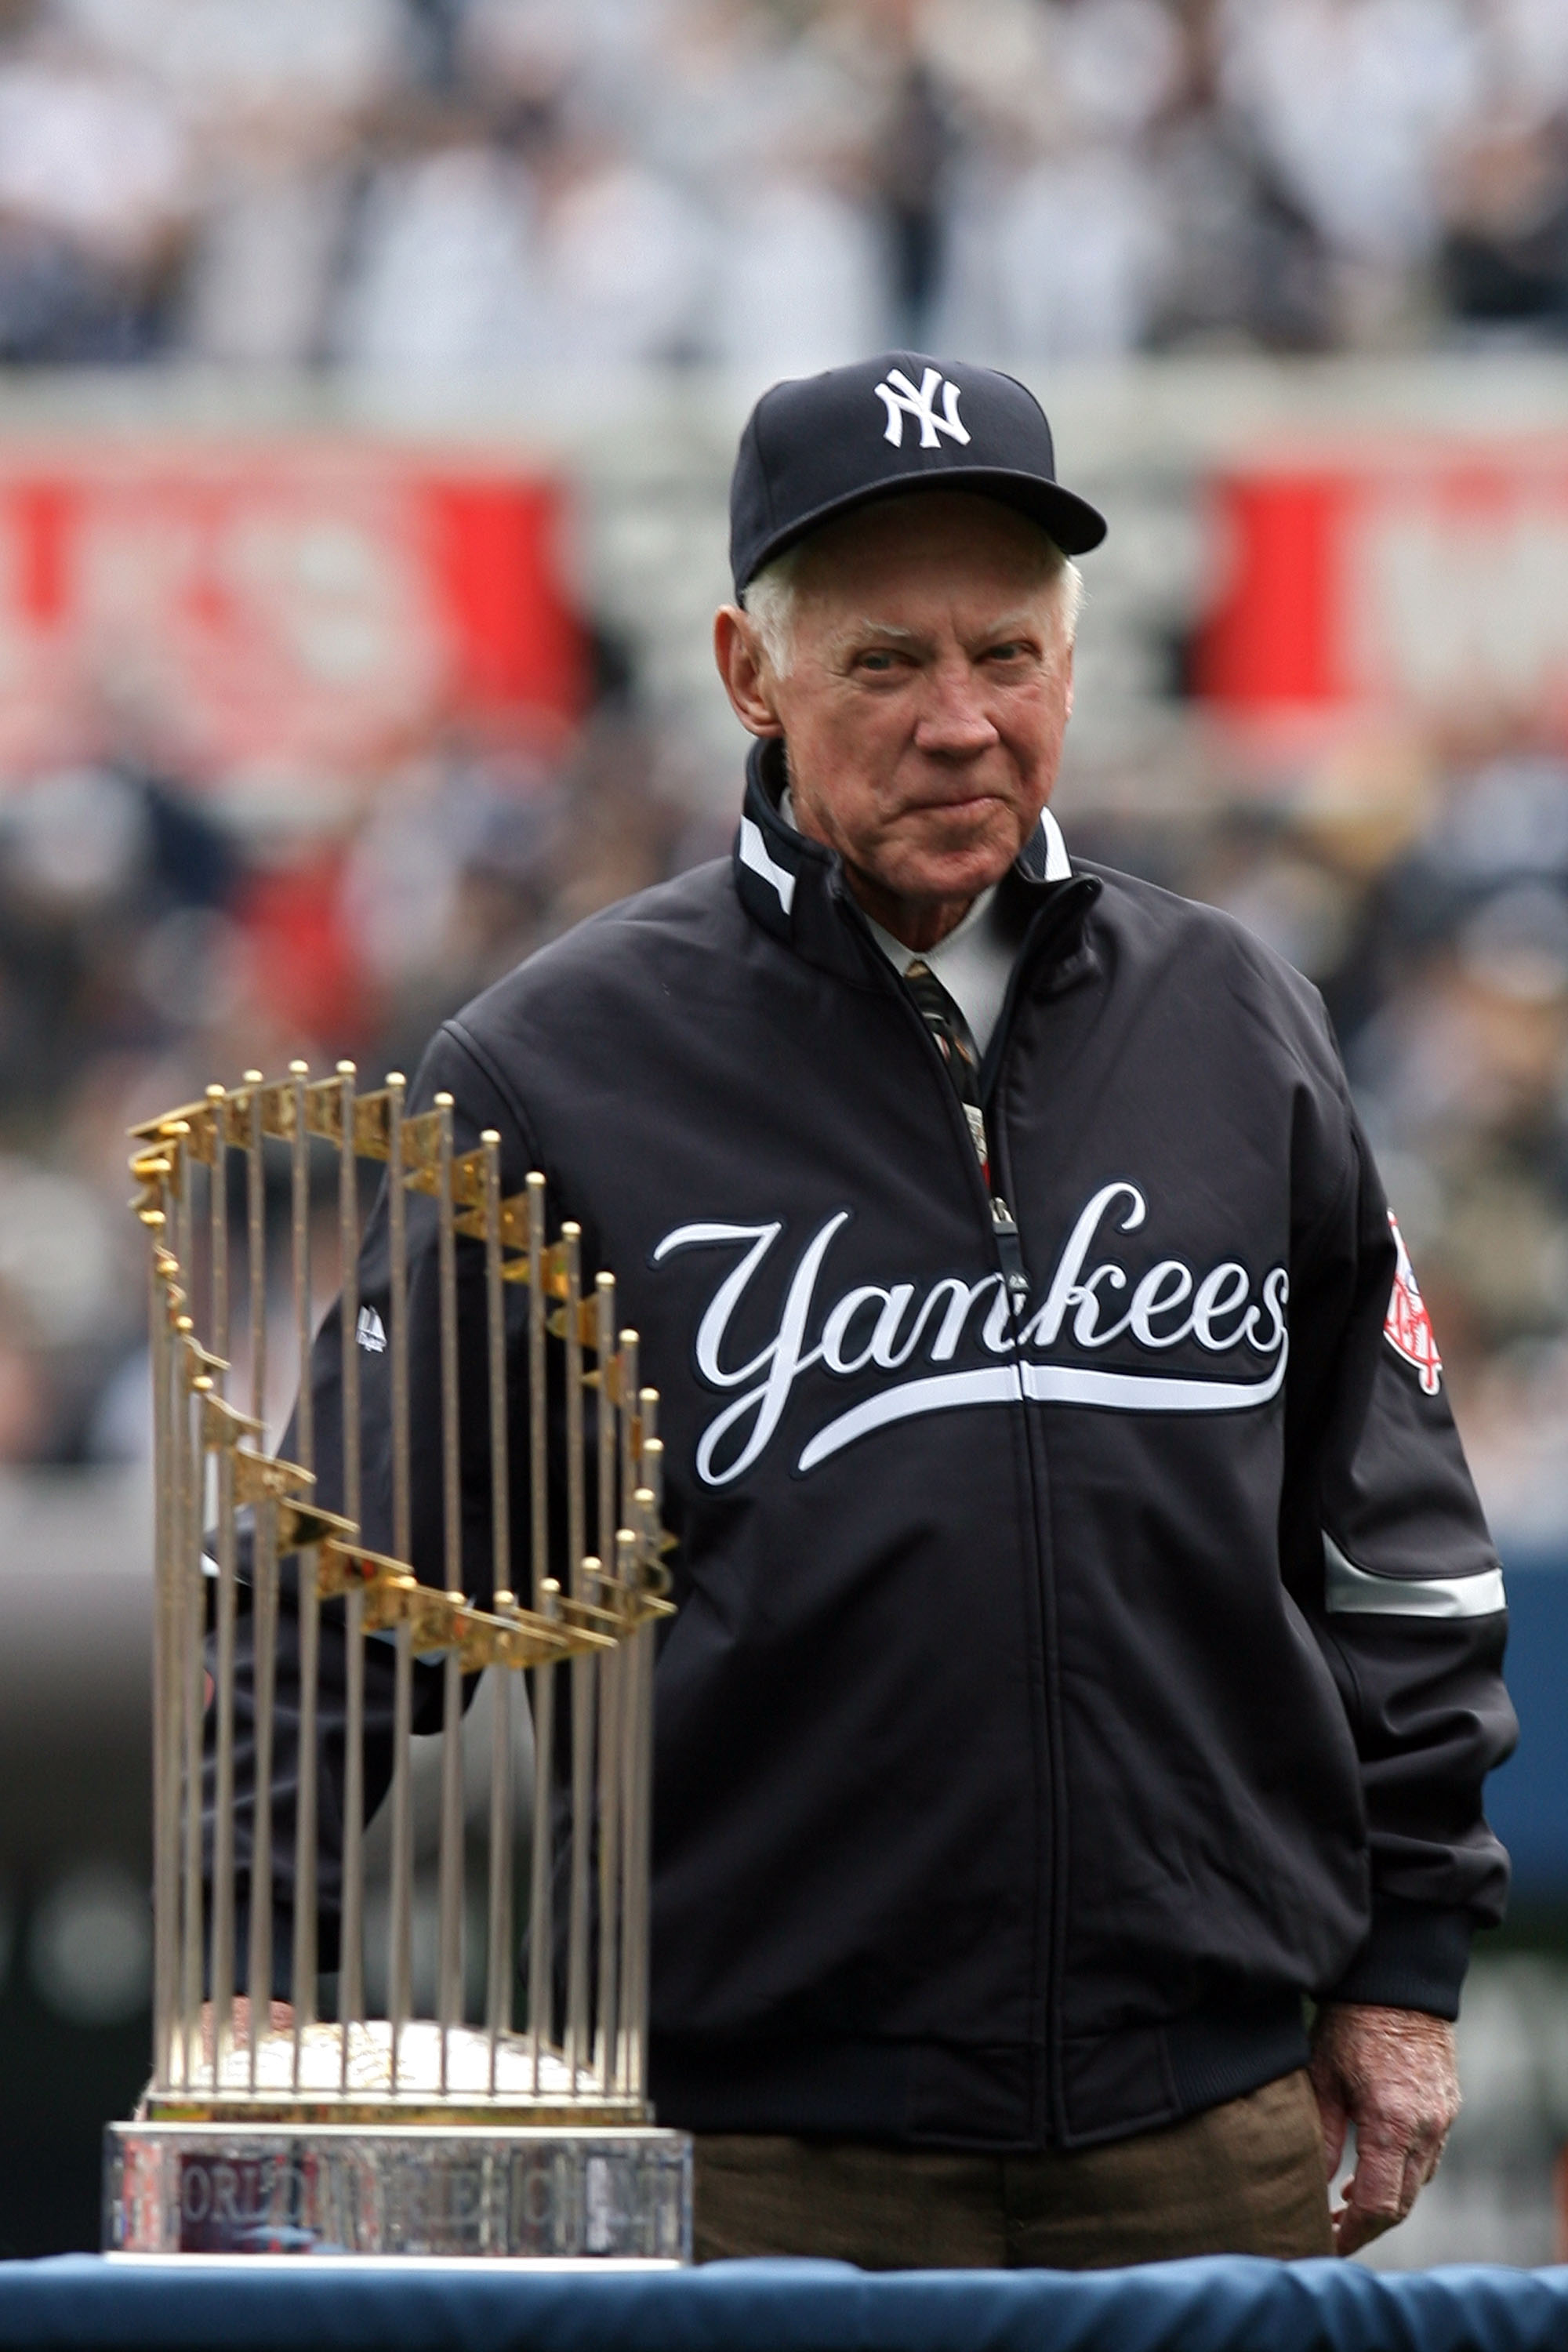 NEW YORK - APRIL 13:  New York Yankee's legend and Baseball Hall of Famer Whitey Ford stands on the field for the presentation of the New York Yankees with their 2009 World Series rings prior to playing against the New York Yankees of the Los Angeles Ange